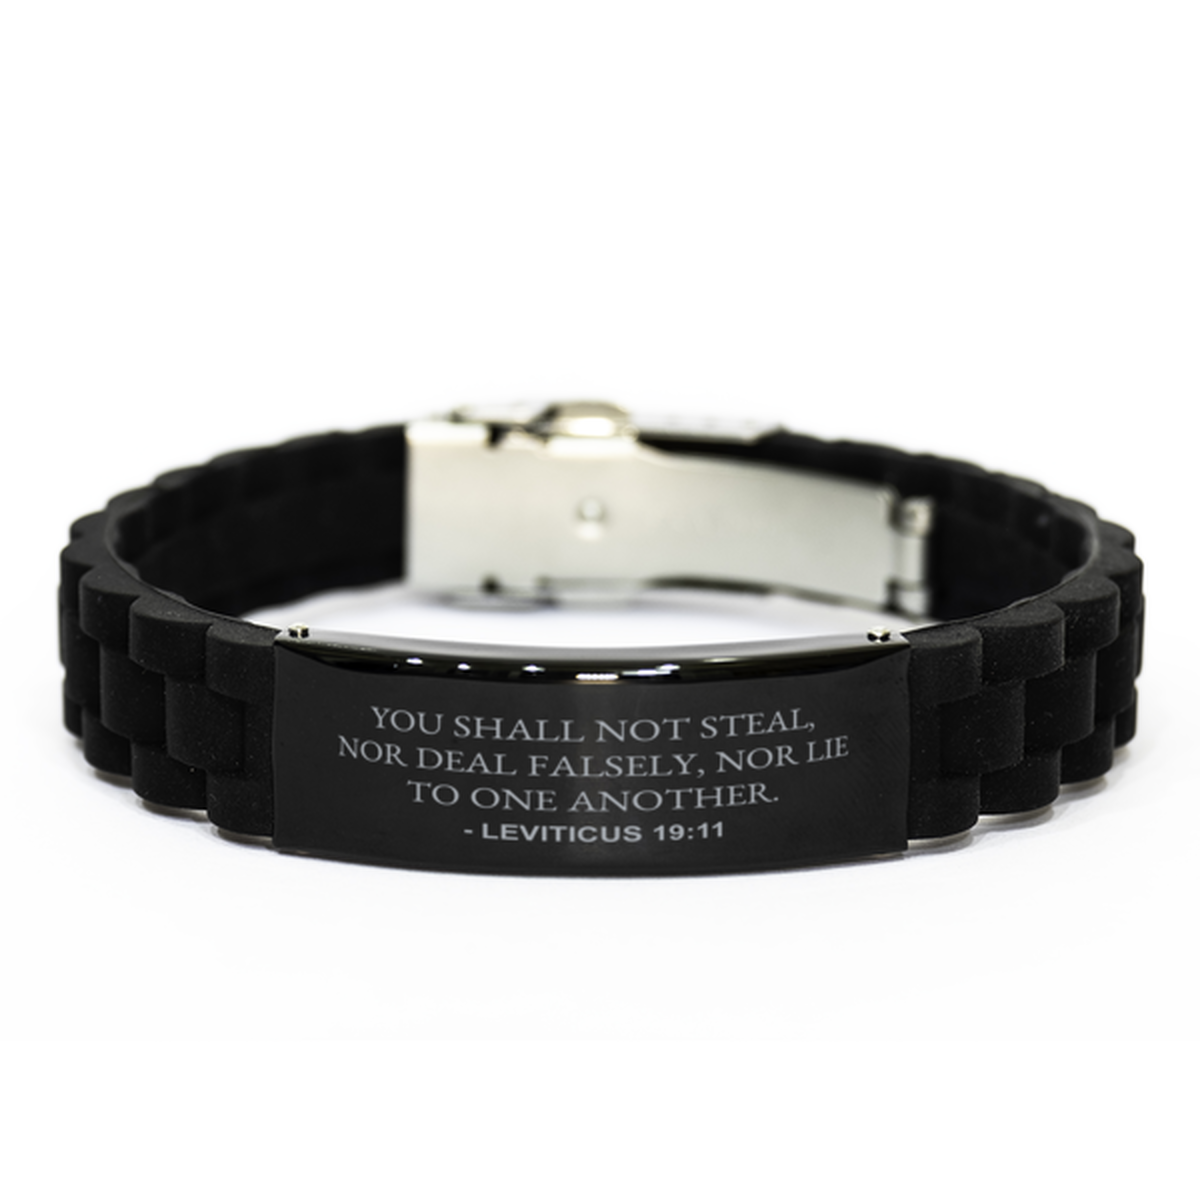 Bible Verse Black Bracelet,, Leviticus 19:11 You Shall Not Steal, Nor Deal Falsely, Nor Lie To, Inspirational Christian Gifts For Men Women